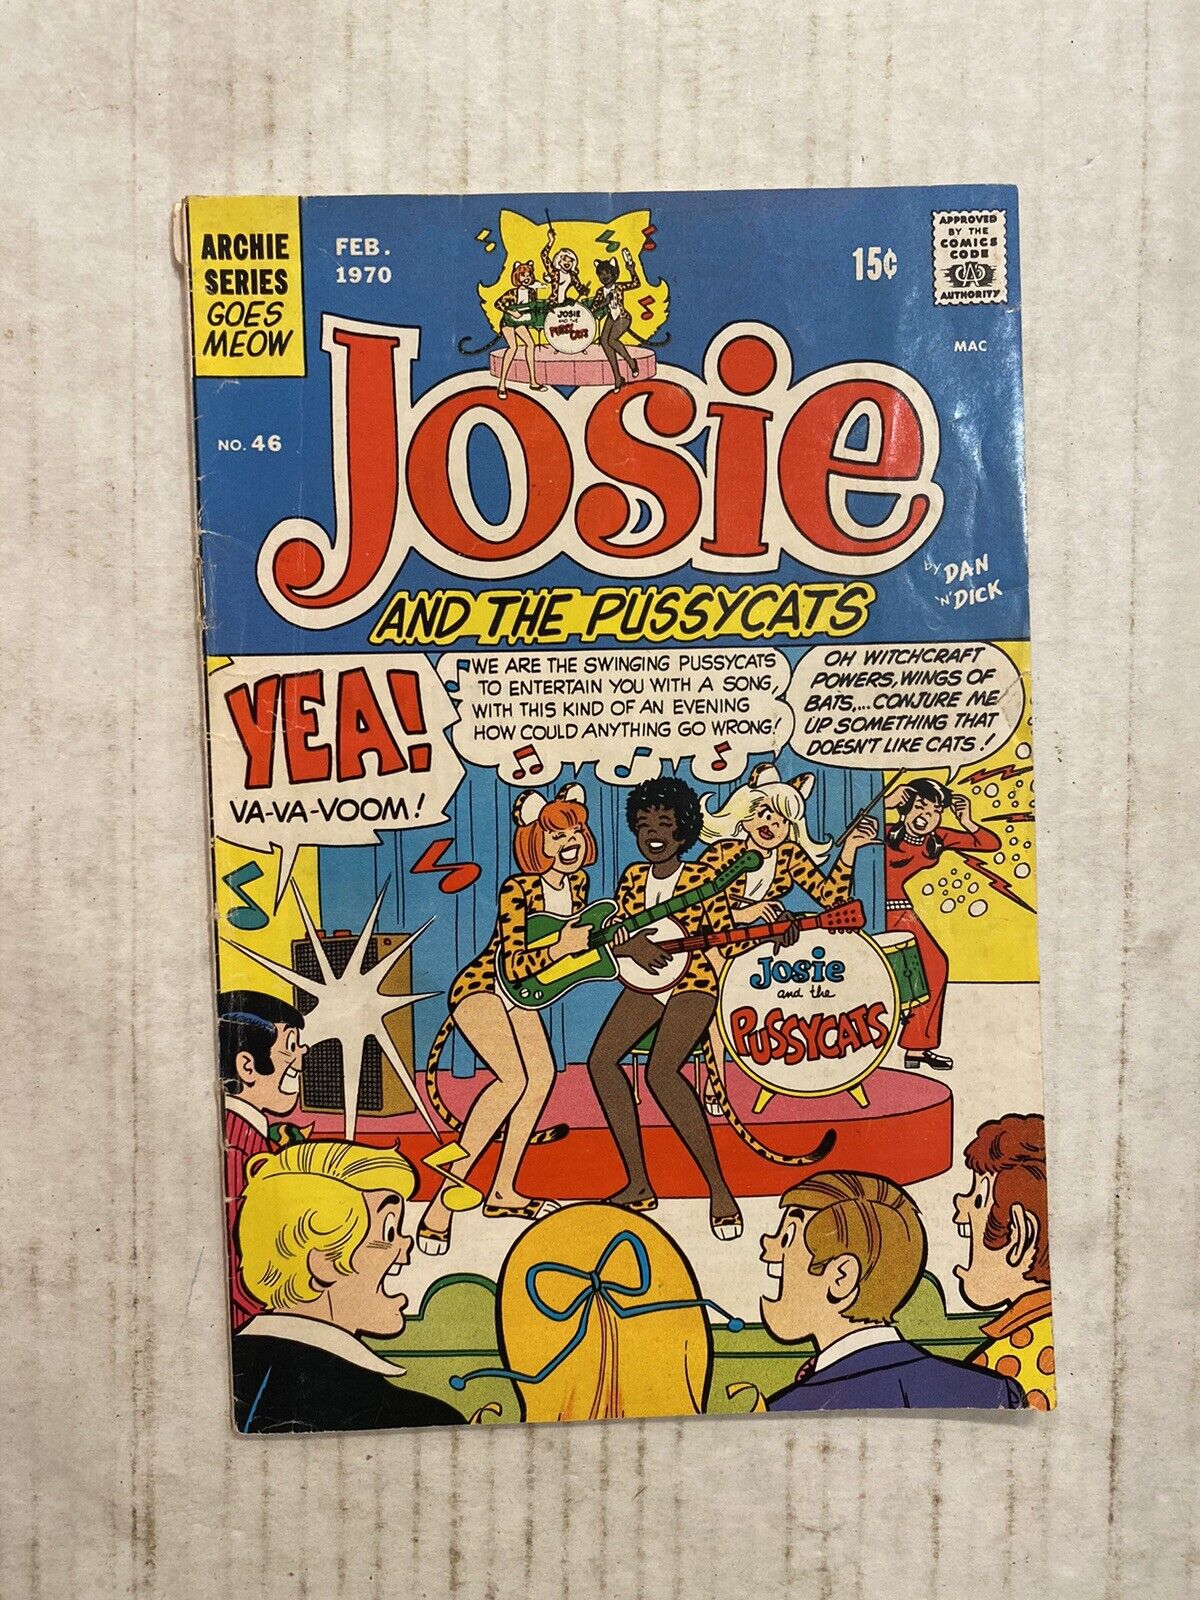 JOSIE & THE PUSSYCATS #46 - KEY 1ST COVER JOSIE & THE PUSSYCATS BAND : RD